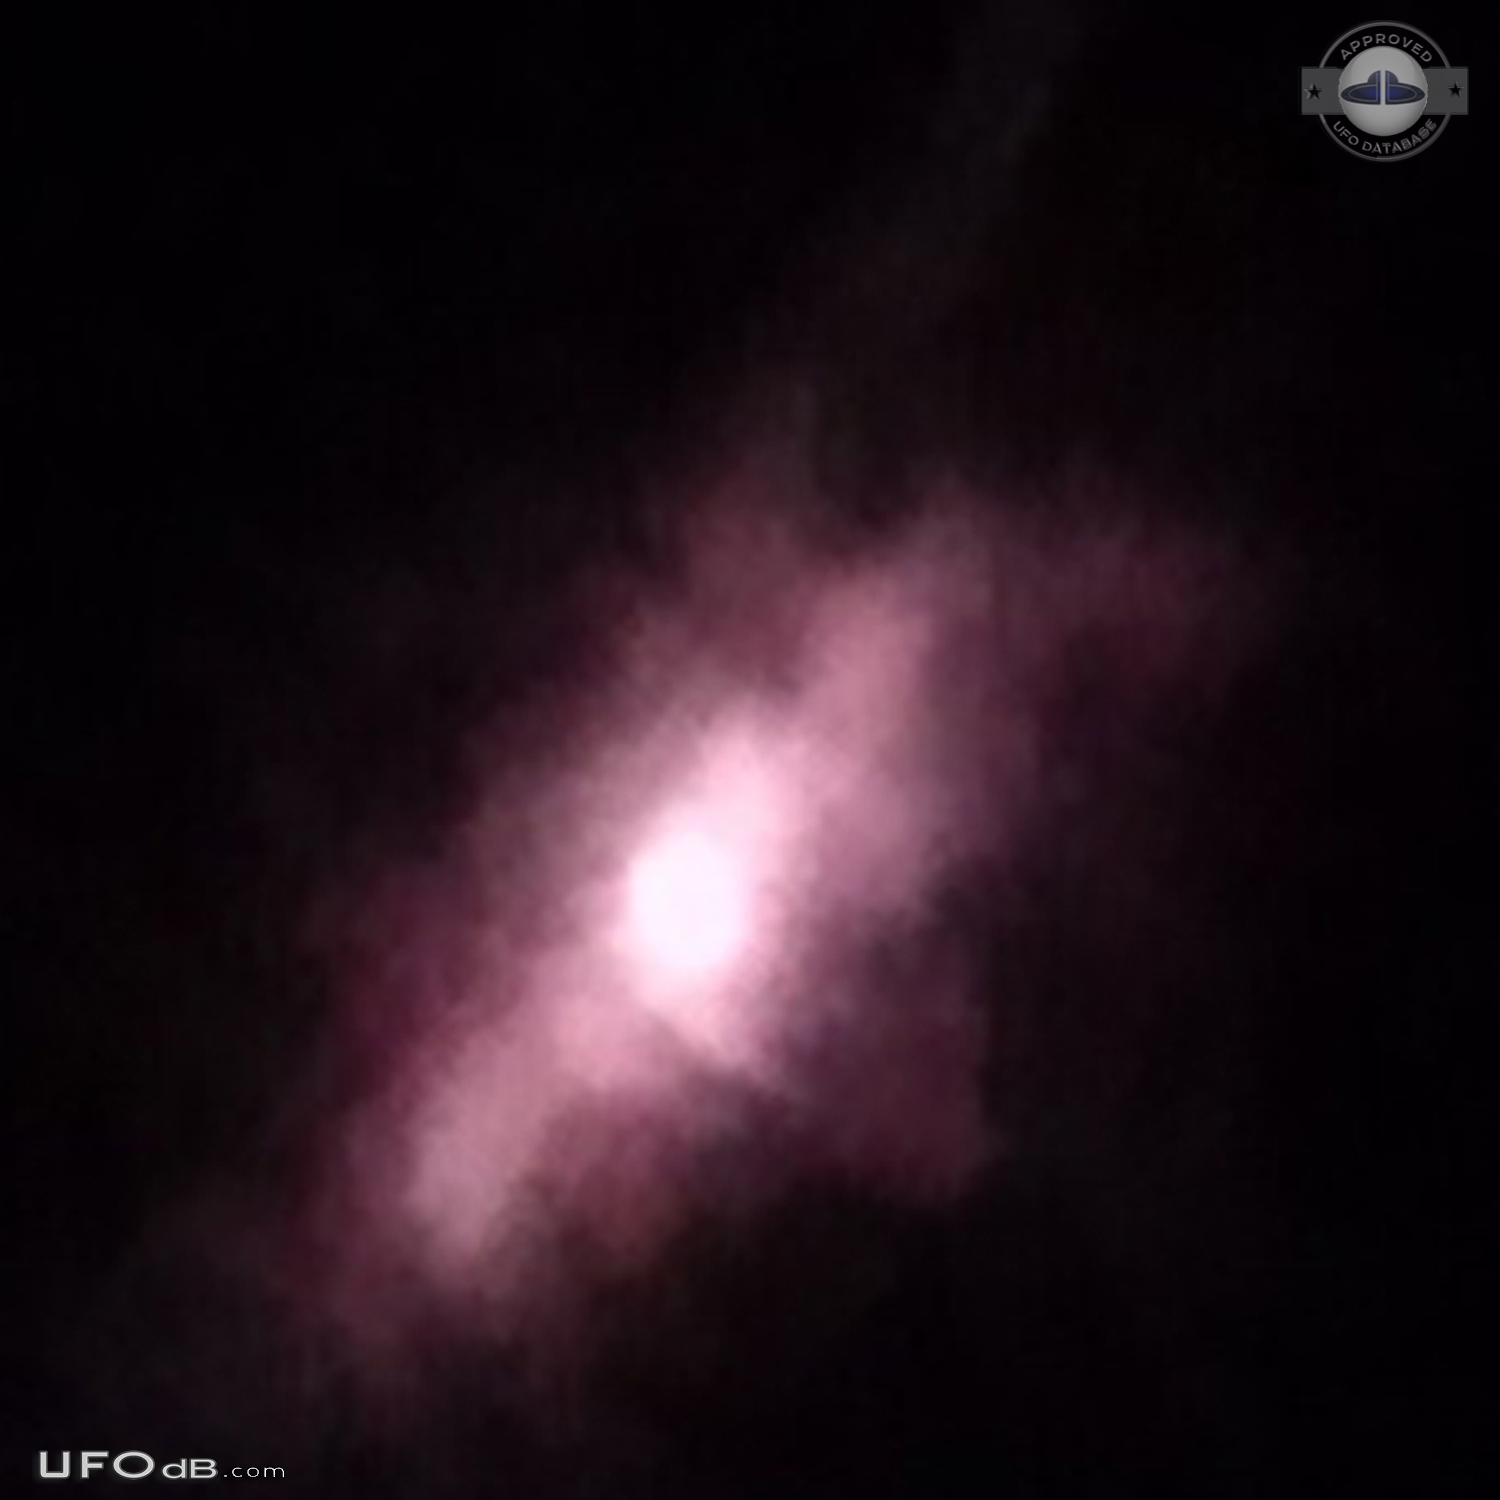 three star-like UFOs moving around in the sky - Orem Utah USA 2014 UFO Picture #701-3